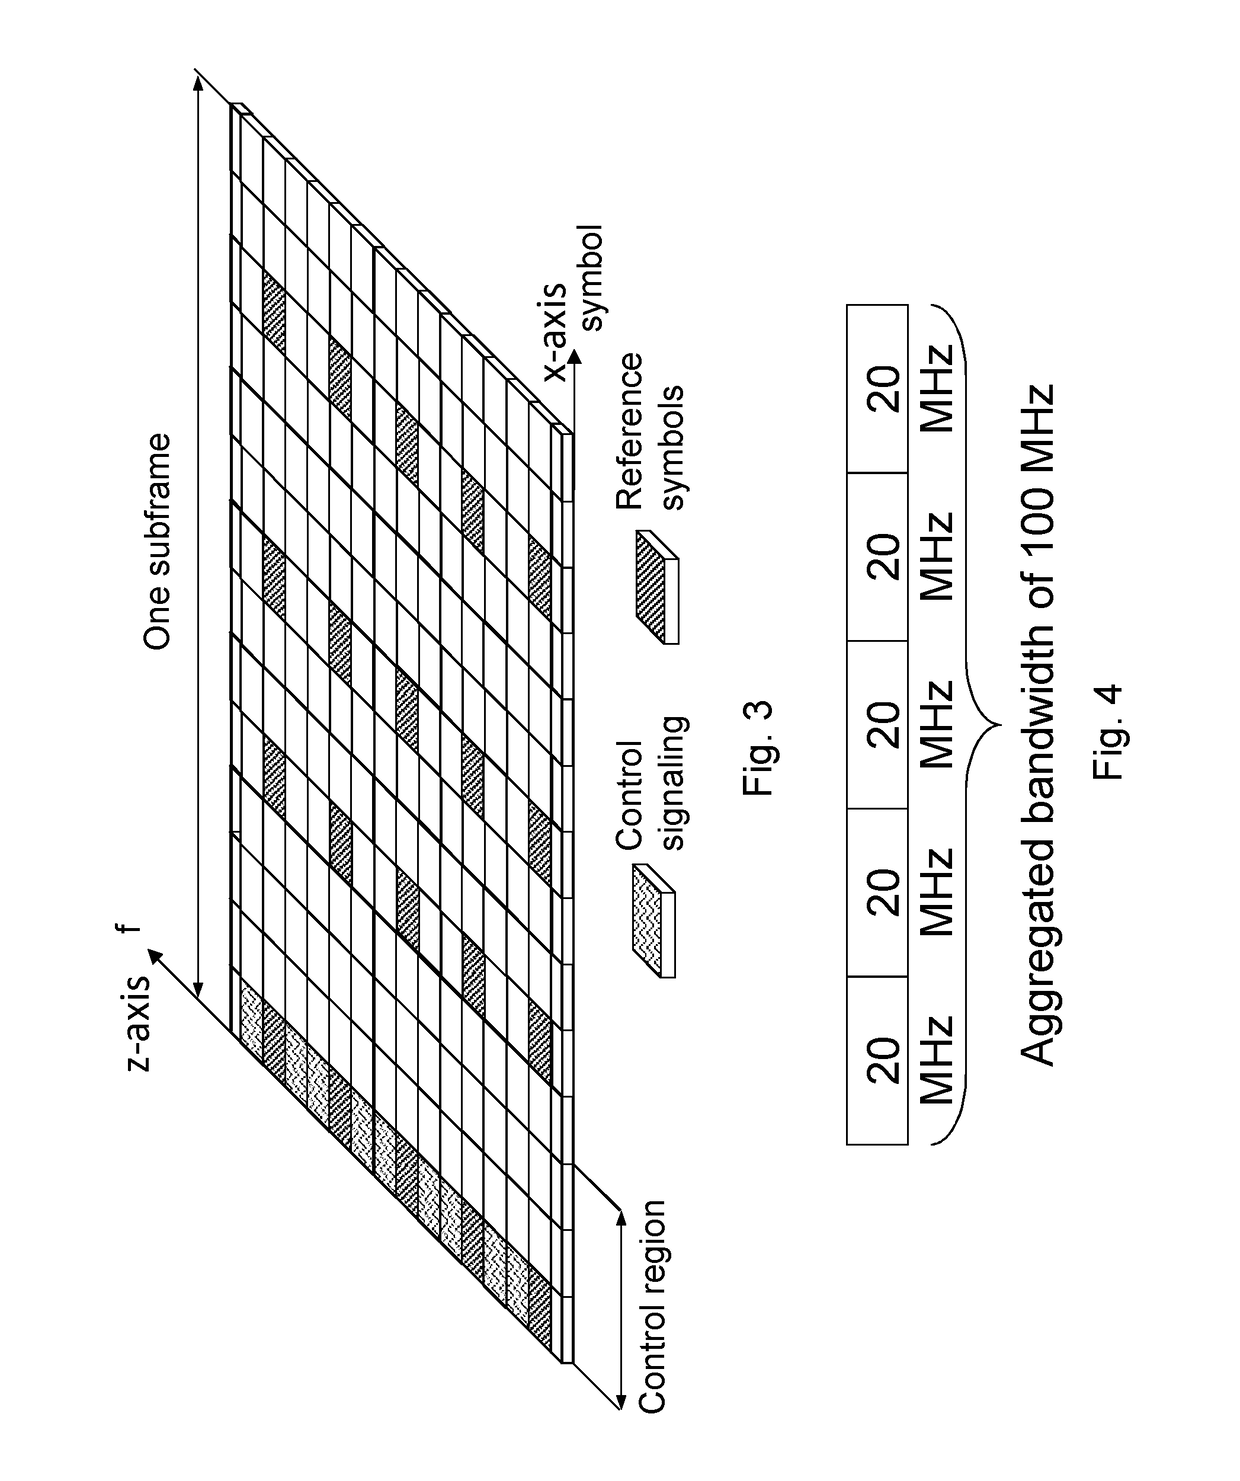 Radio access node, communication terminal and methods performed therein